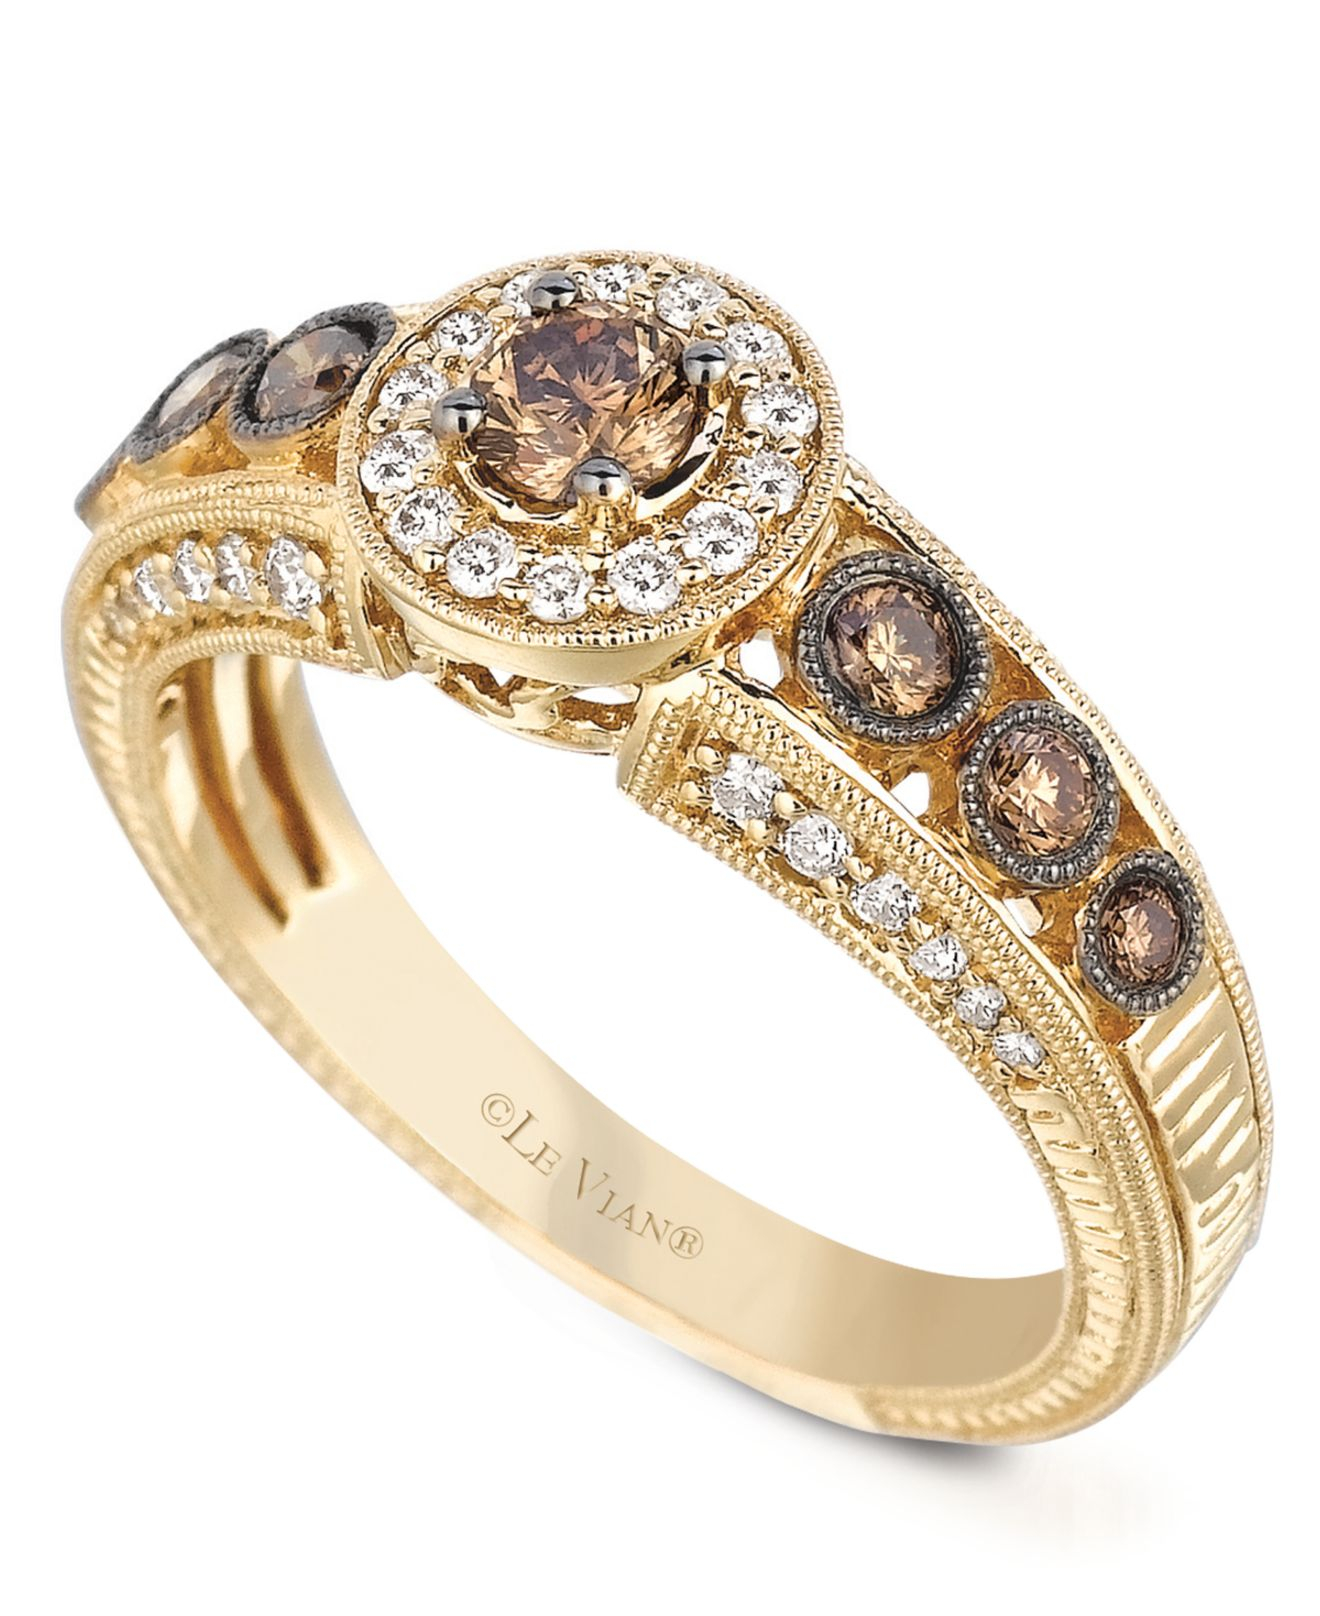 Le vian White And Chocolate Diamond Engagement Ring (5/8 Ct. T.w.) In 14k Gold in Metallic Lyst